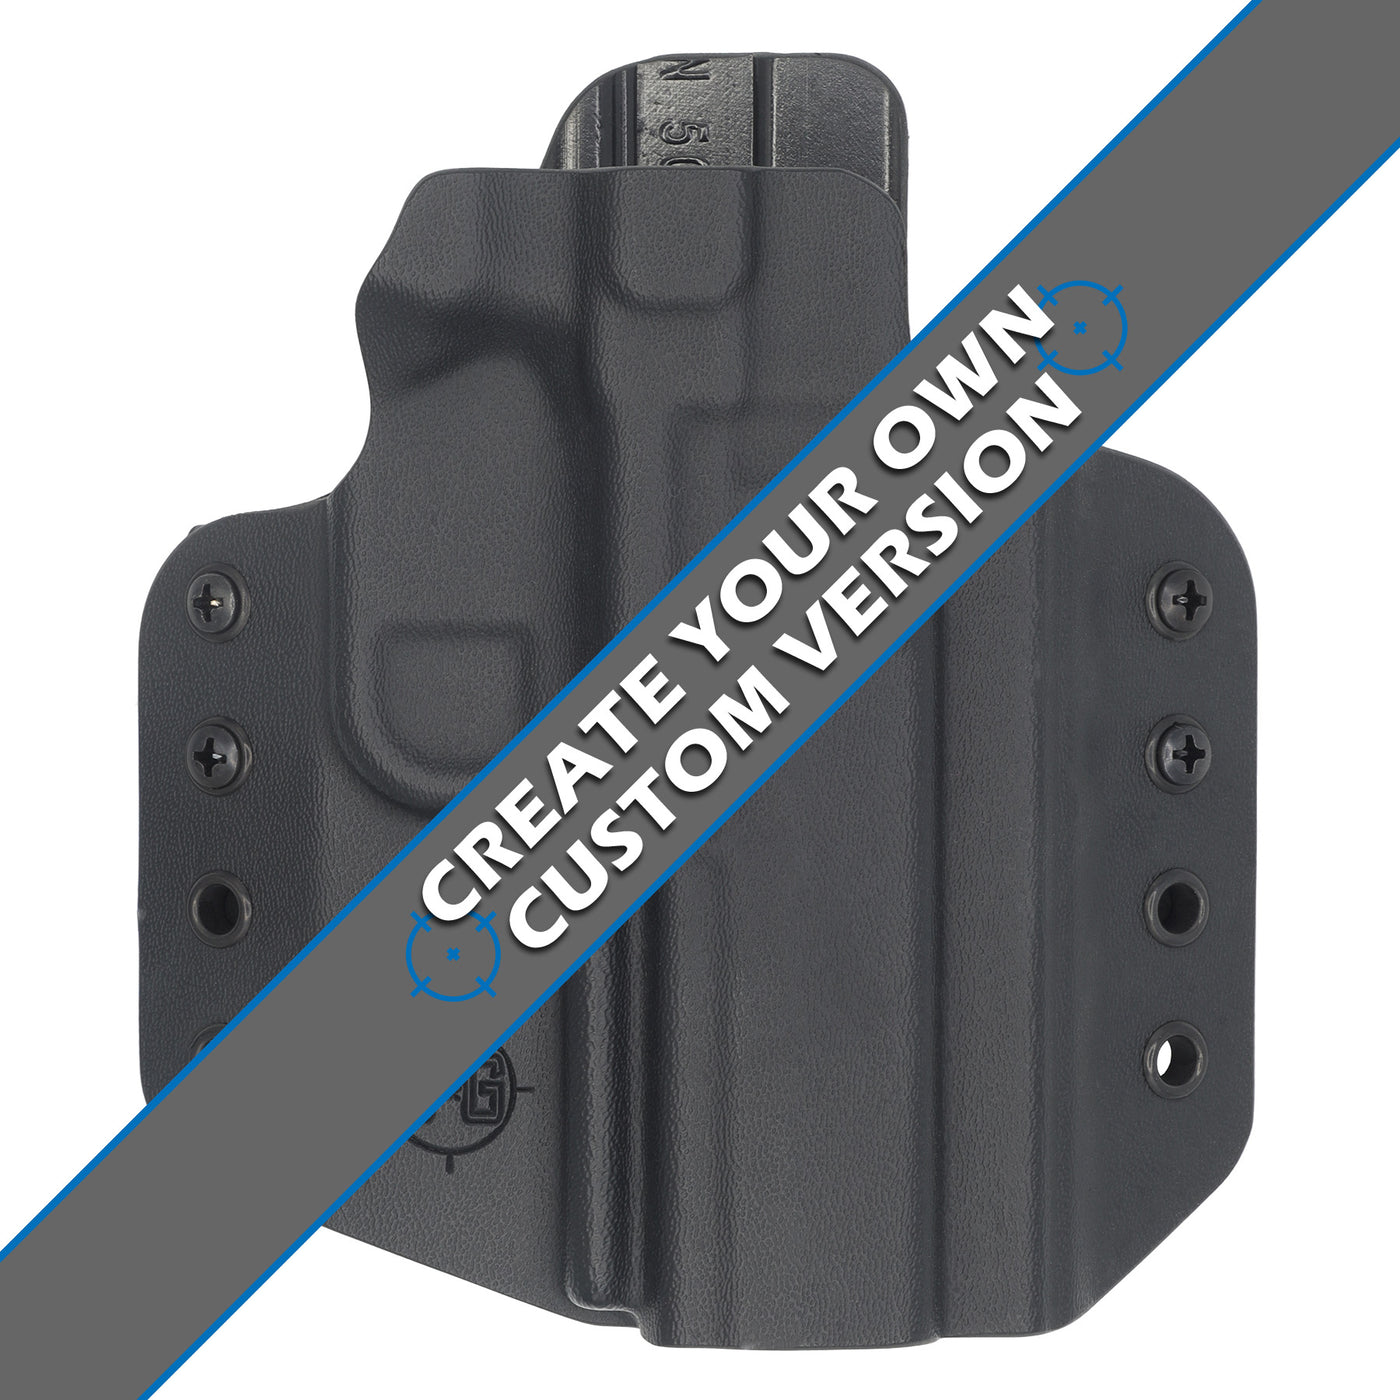 FN 509 OWB Covert Kydex Holster made by C and G Holsters. With an overlay for Create your Custom Holster.